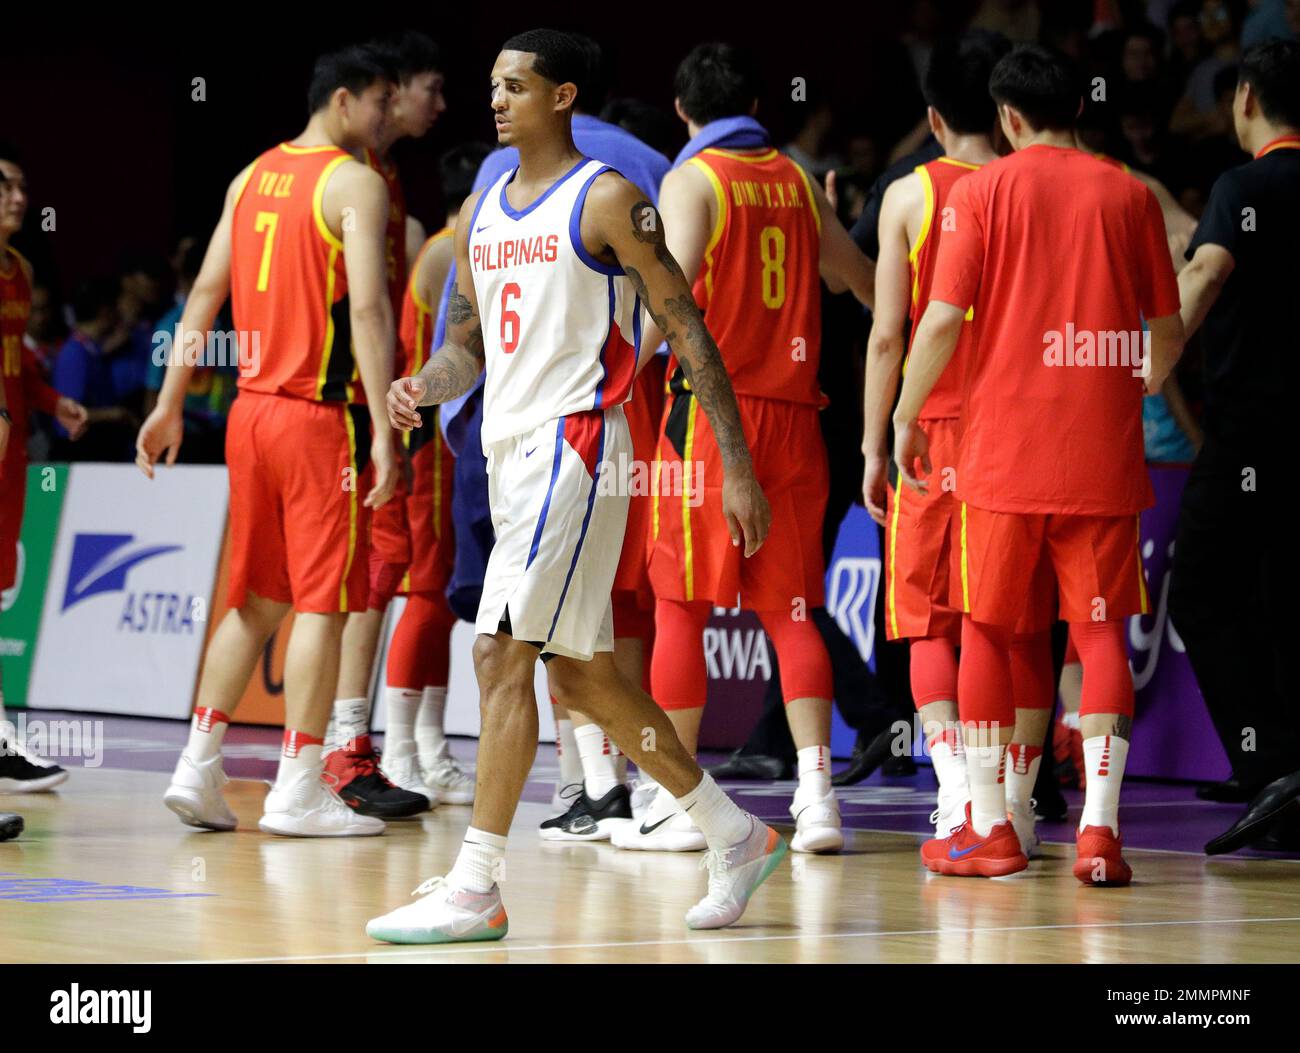 Philippines' Jordan Clarkson leaves the court following his teams 82-80  loss to China in their men's basketball game at the 18th Asian Games in  Jakarta, Indonesia on Tuesday, Aug. 21, 2018. (AP